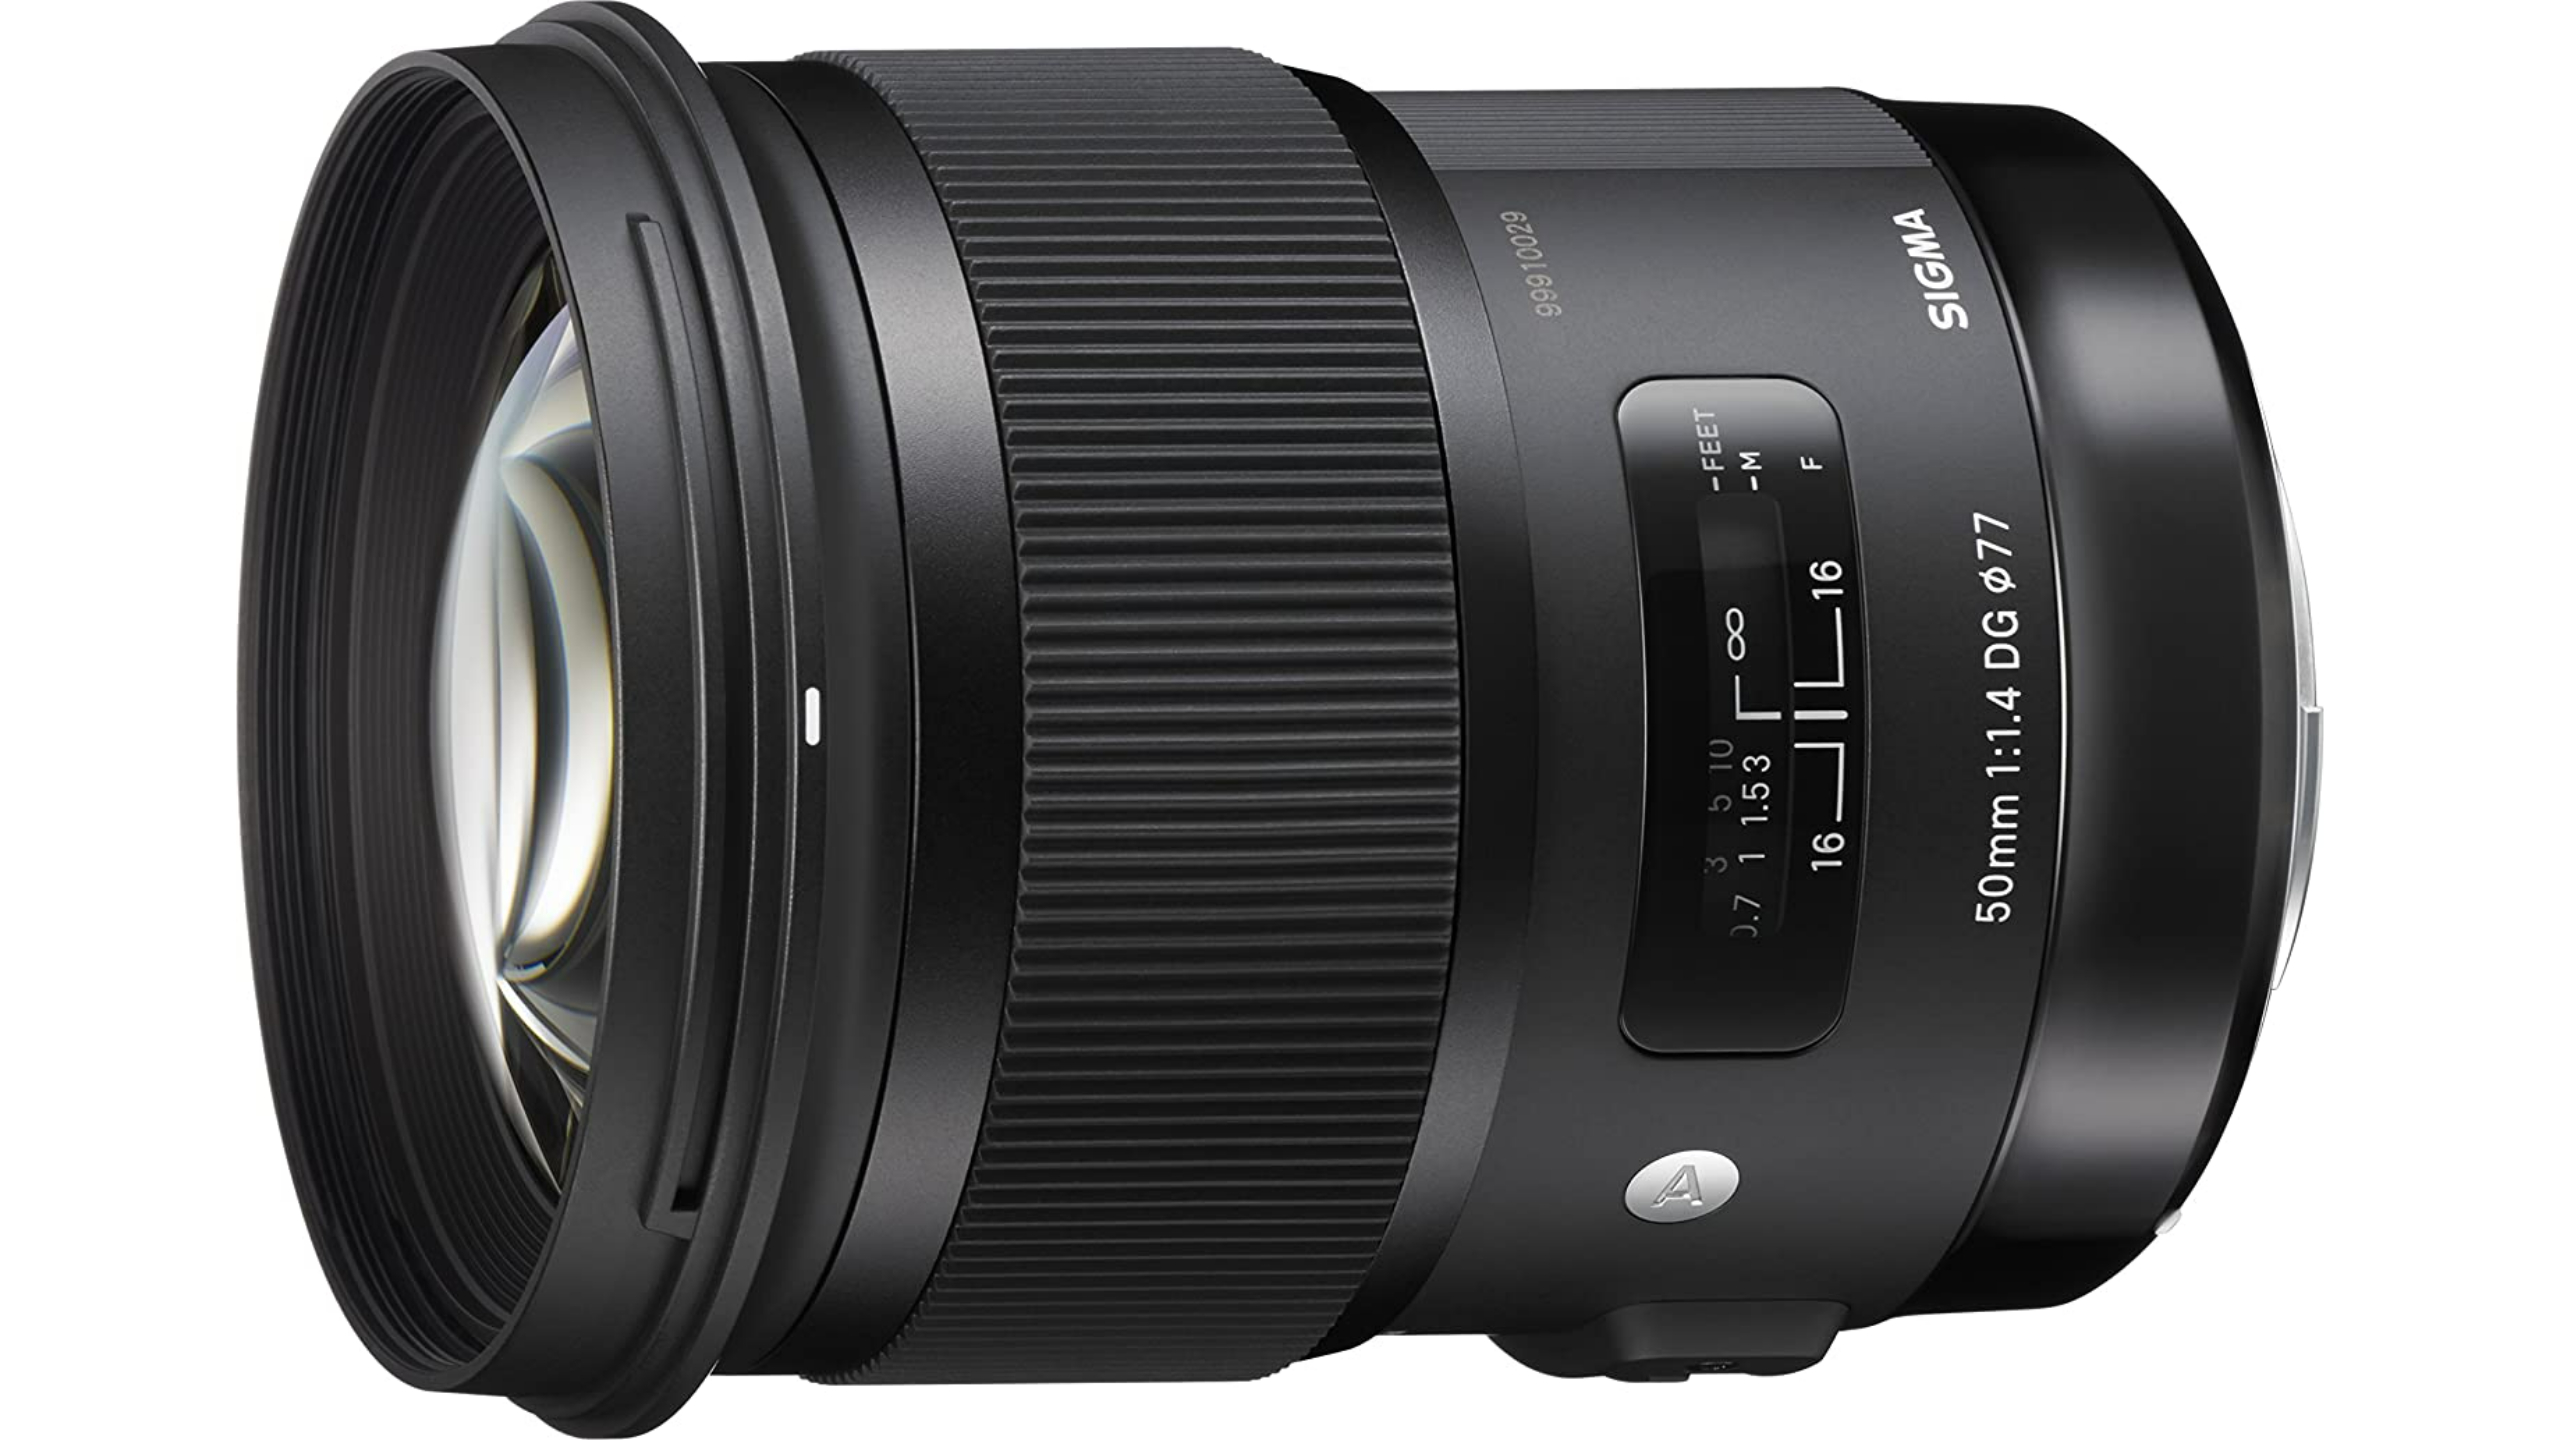 Product photo of the Sigma 35mm 1.4 lens